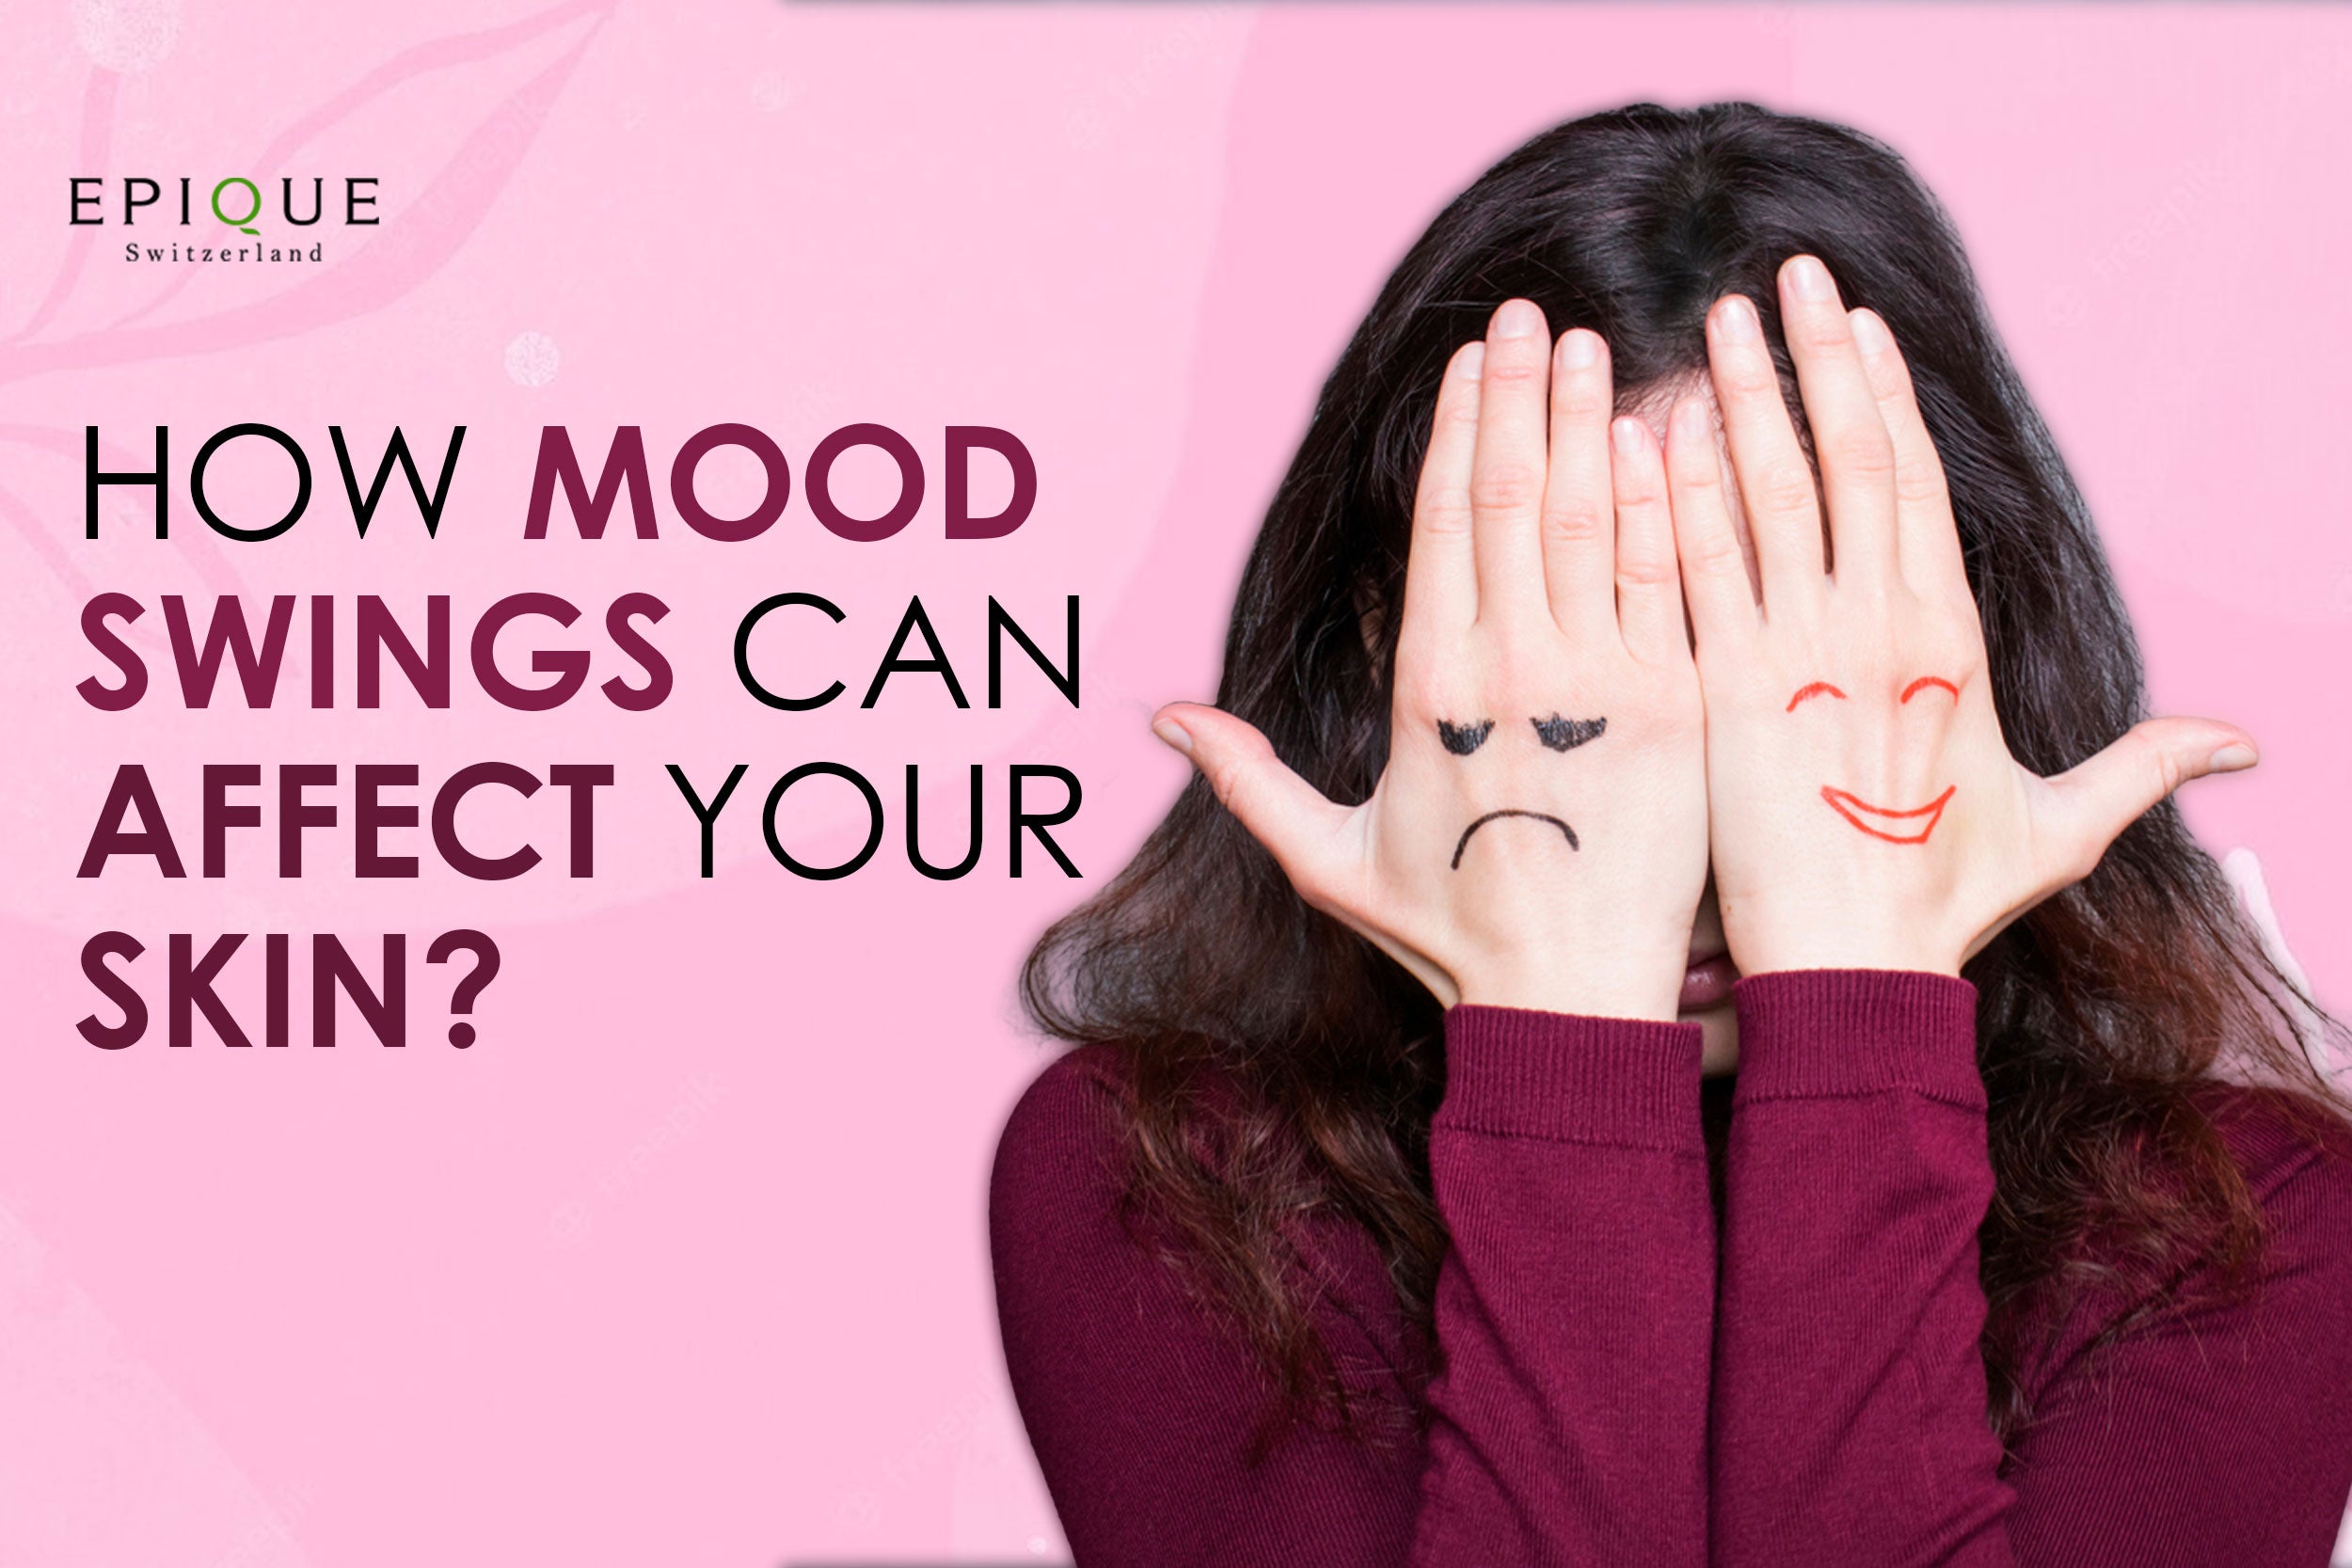 Feeling the Blues? Here’s How Mood Swings Can Affect Your Skin